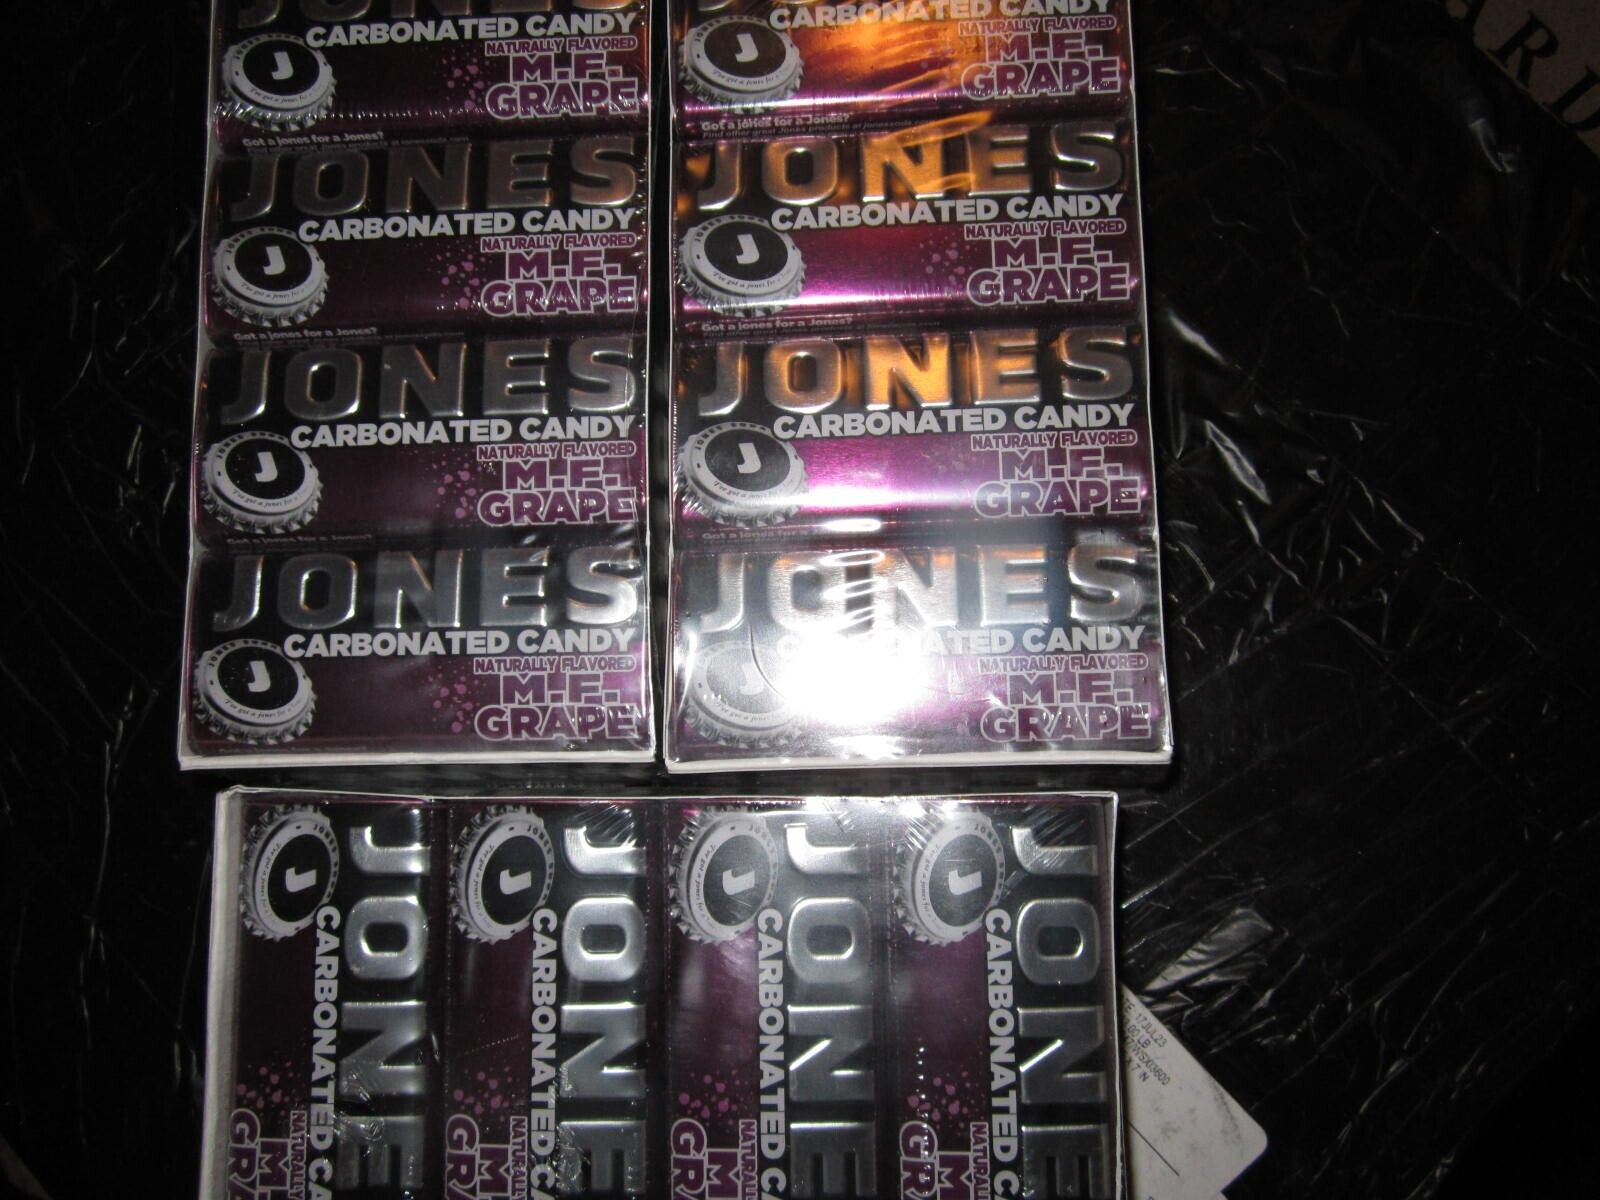 Jones Soda Mints M.F. Grape (3 Sealed Boxes of 8 Sealed Tins) Discontinued, RARE